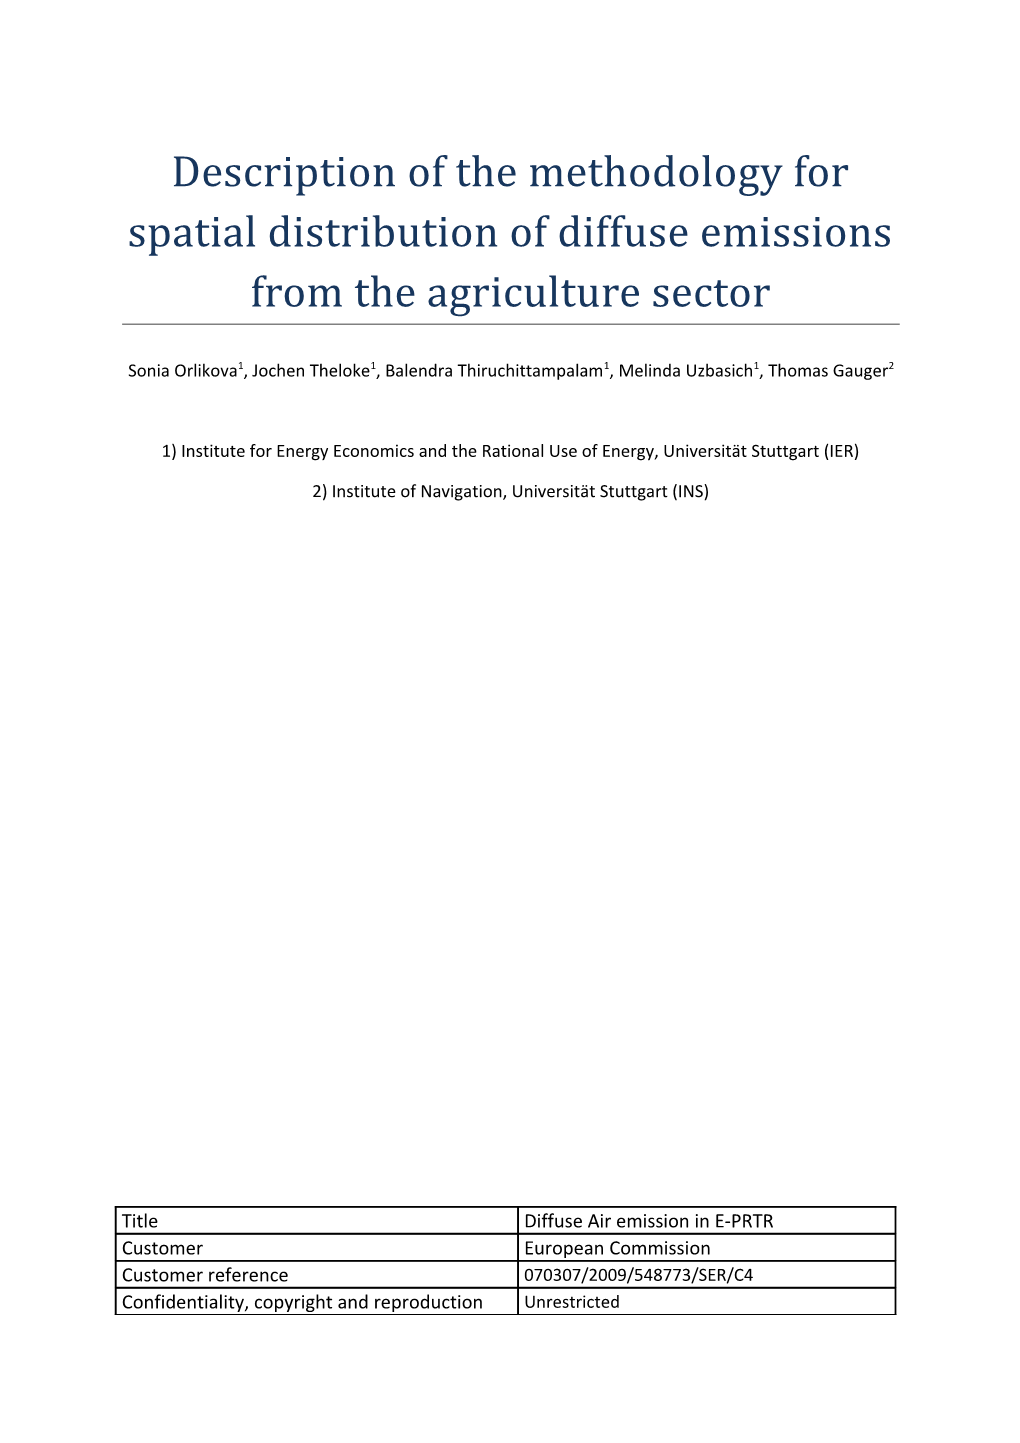 Description of the Methodology for Spatial Distribution of Diffuse Emissions from The